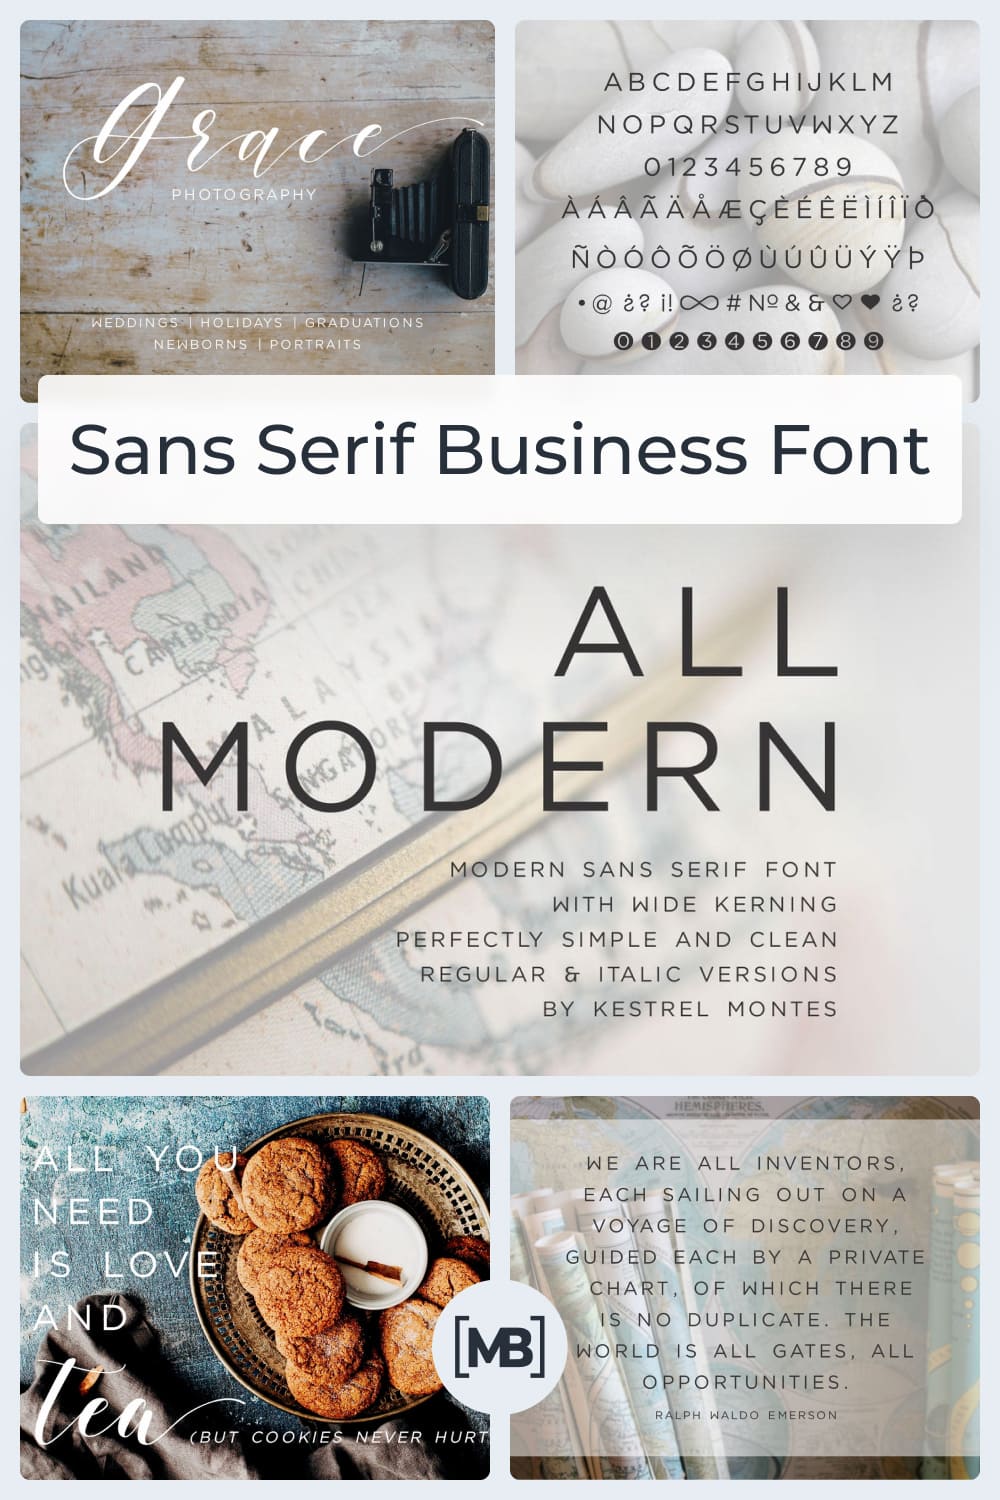 This font is beautifully simple, modern.